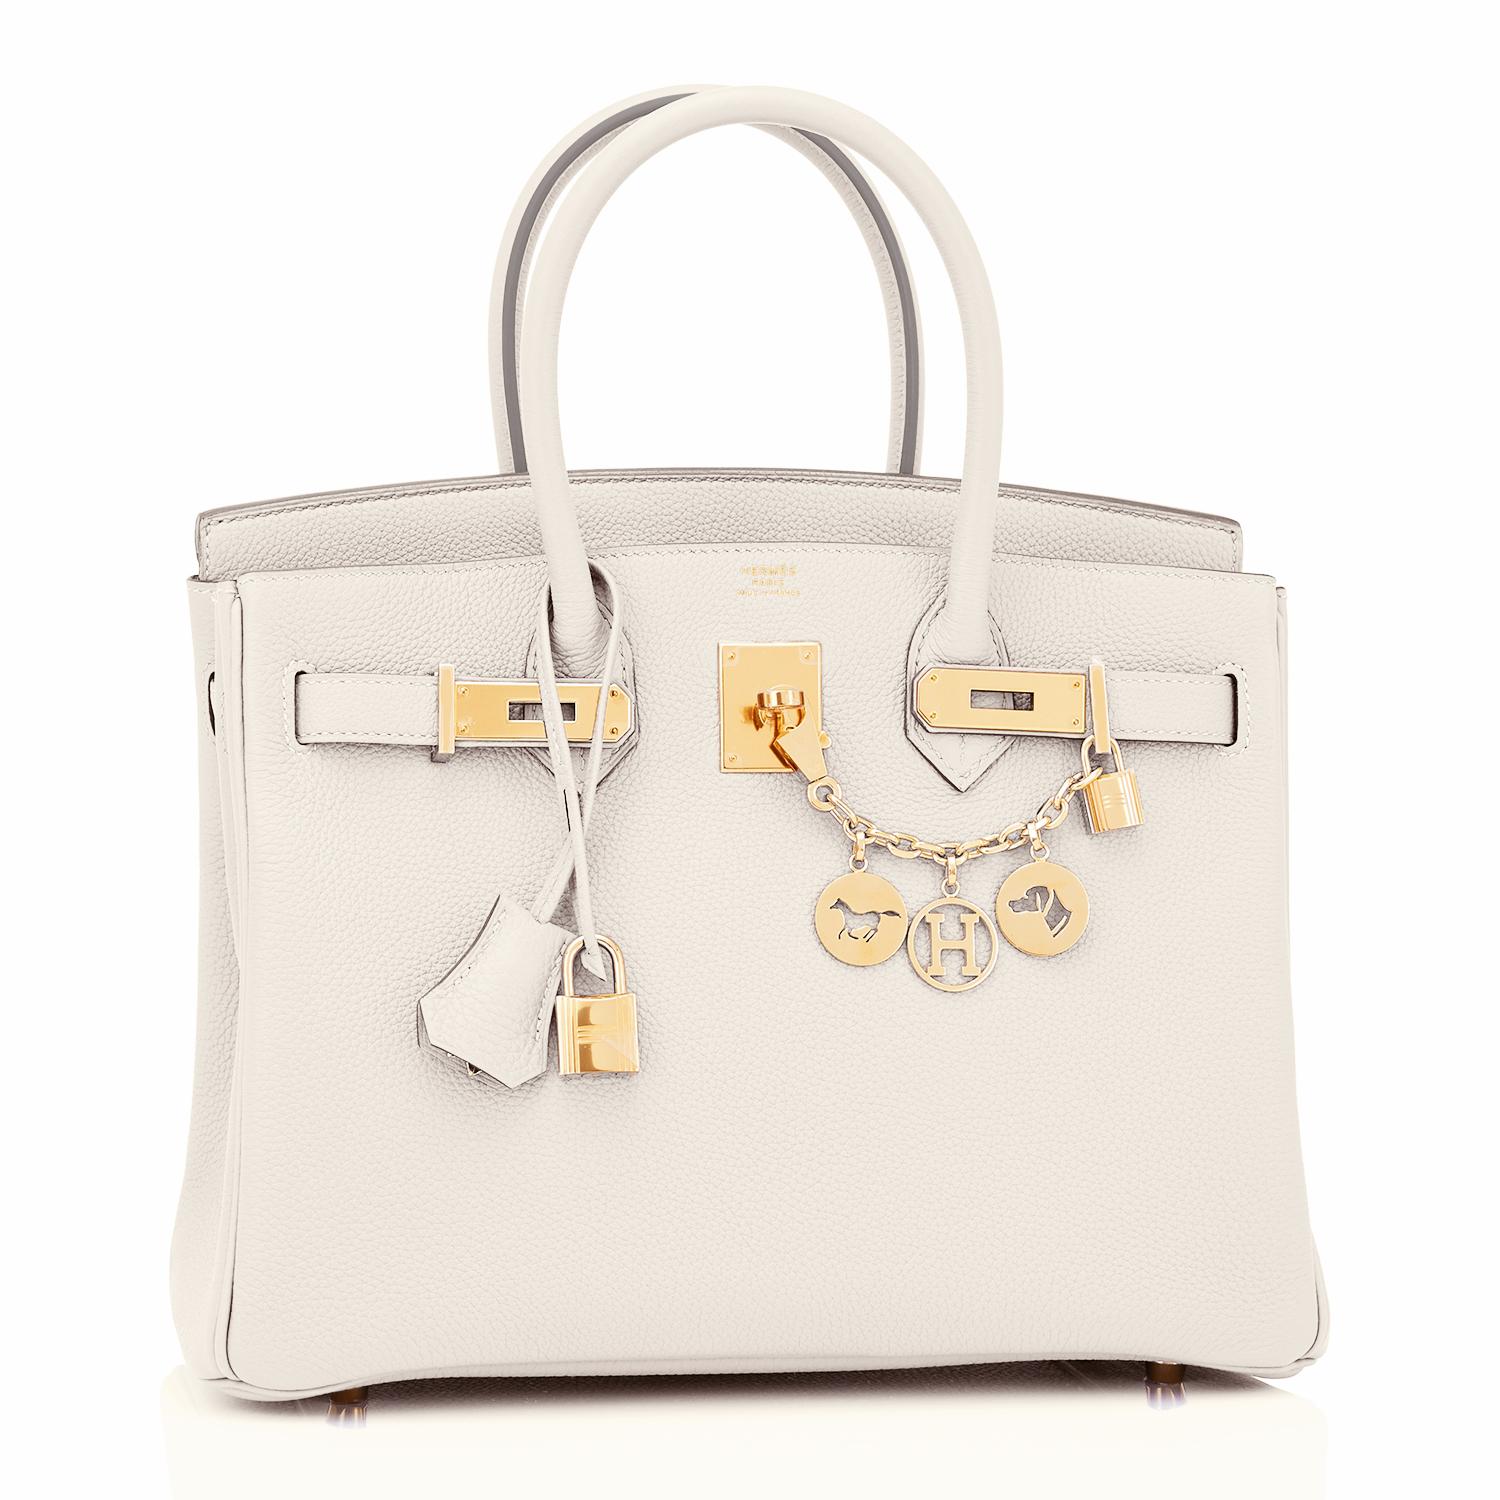 Hermes Birkin 30 Craie Togo Chalk Off White Gold Hardware Bag B Stamp, 2023
Just purchased from Hermes store; bag bears new interior 2023 B Stamp.
Brand New in Box. Store fresh. Pristine Condition (plastic on hardware.)
Perfect gift! Comes in full